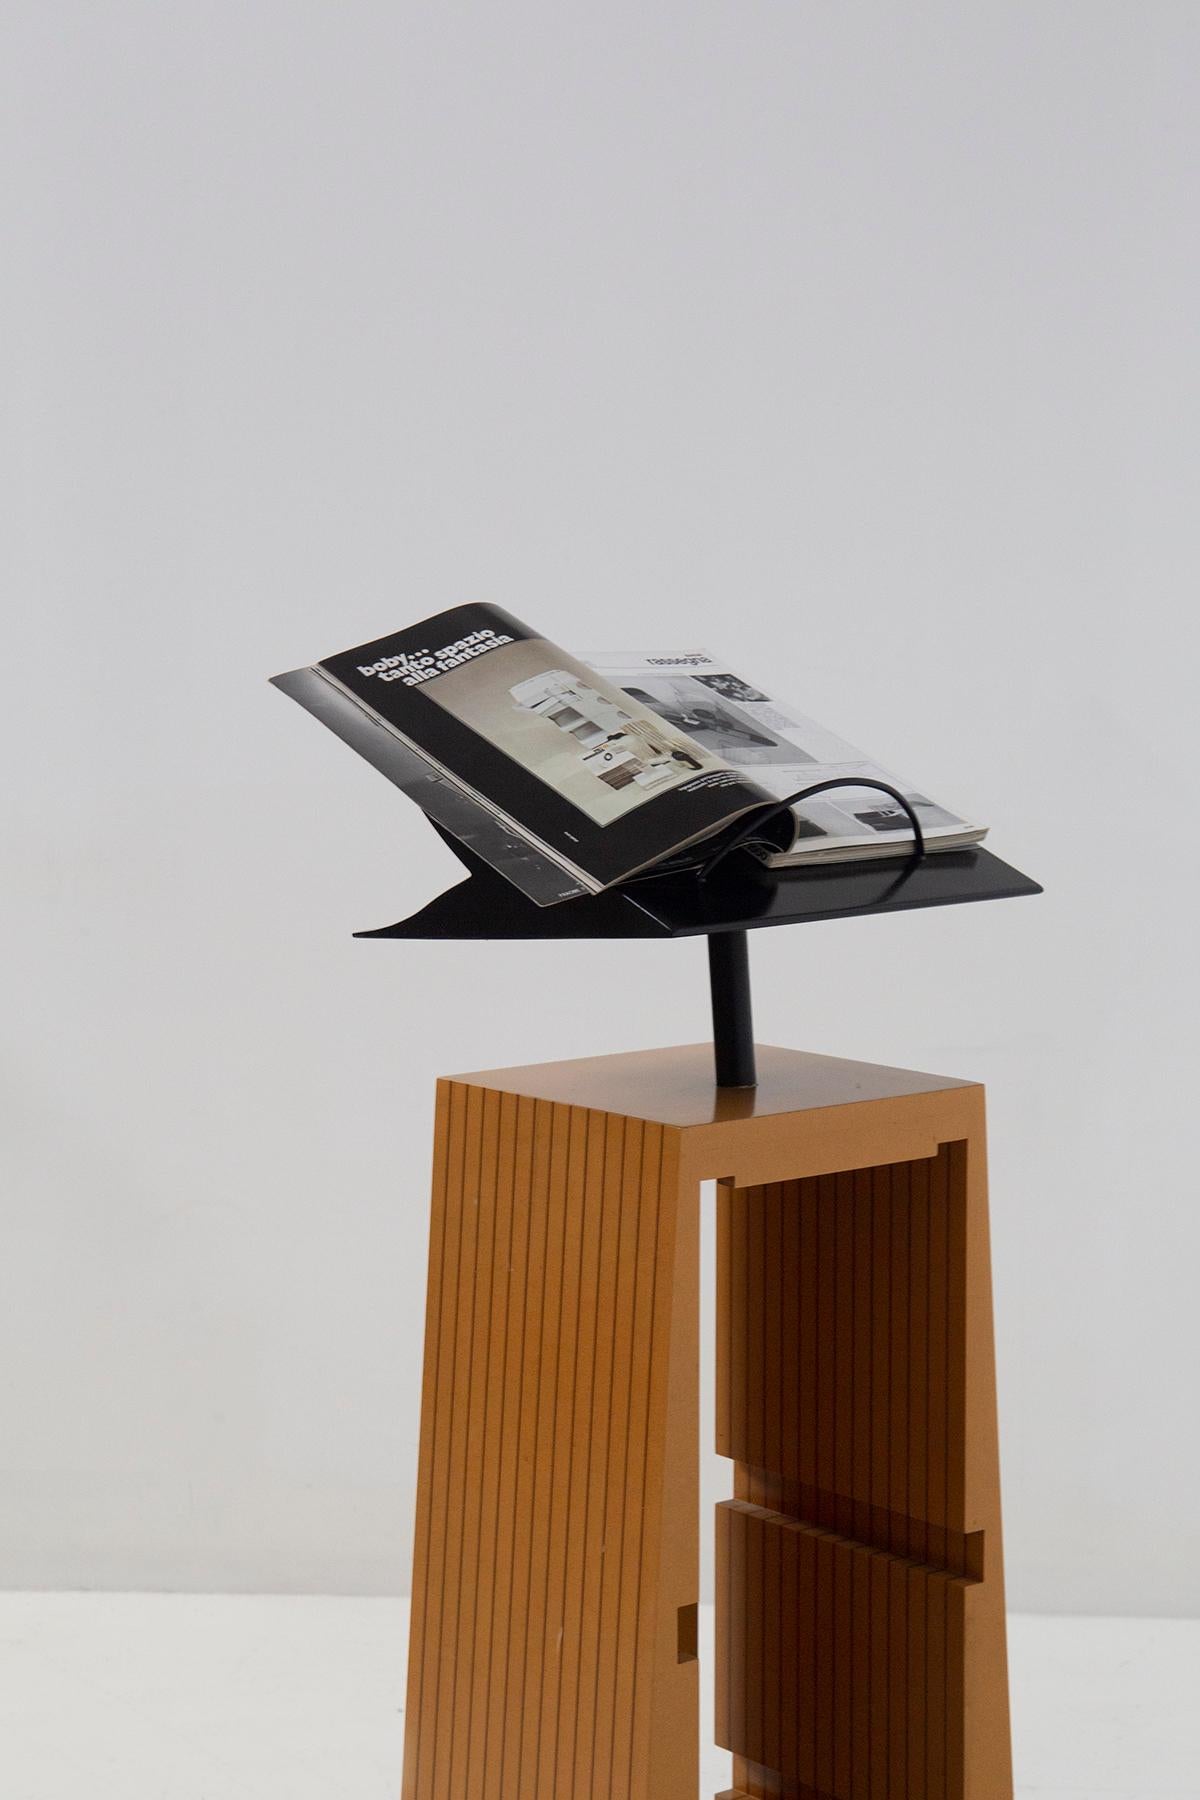 Late 20th Century Modern lectern by STÉPHANE MILLET known as 'ESSAIME' for QUART DE POIL For Sale